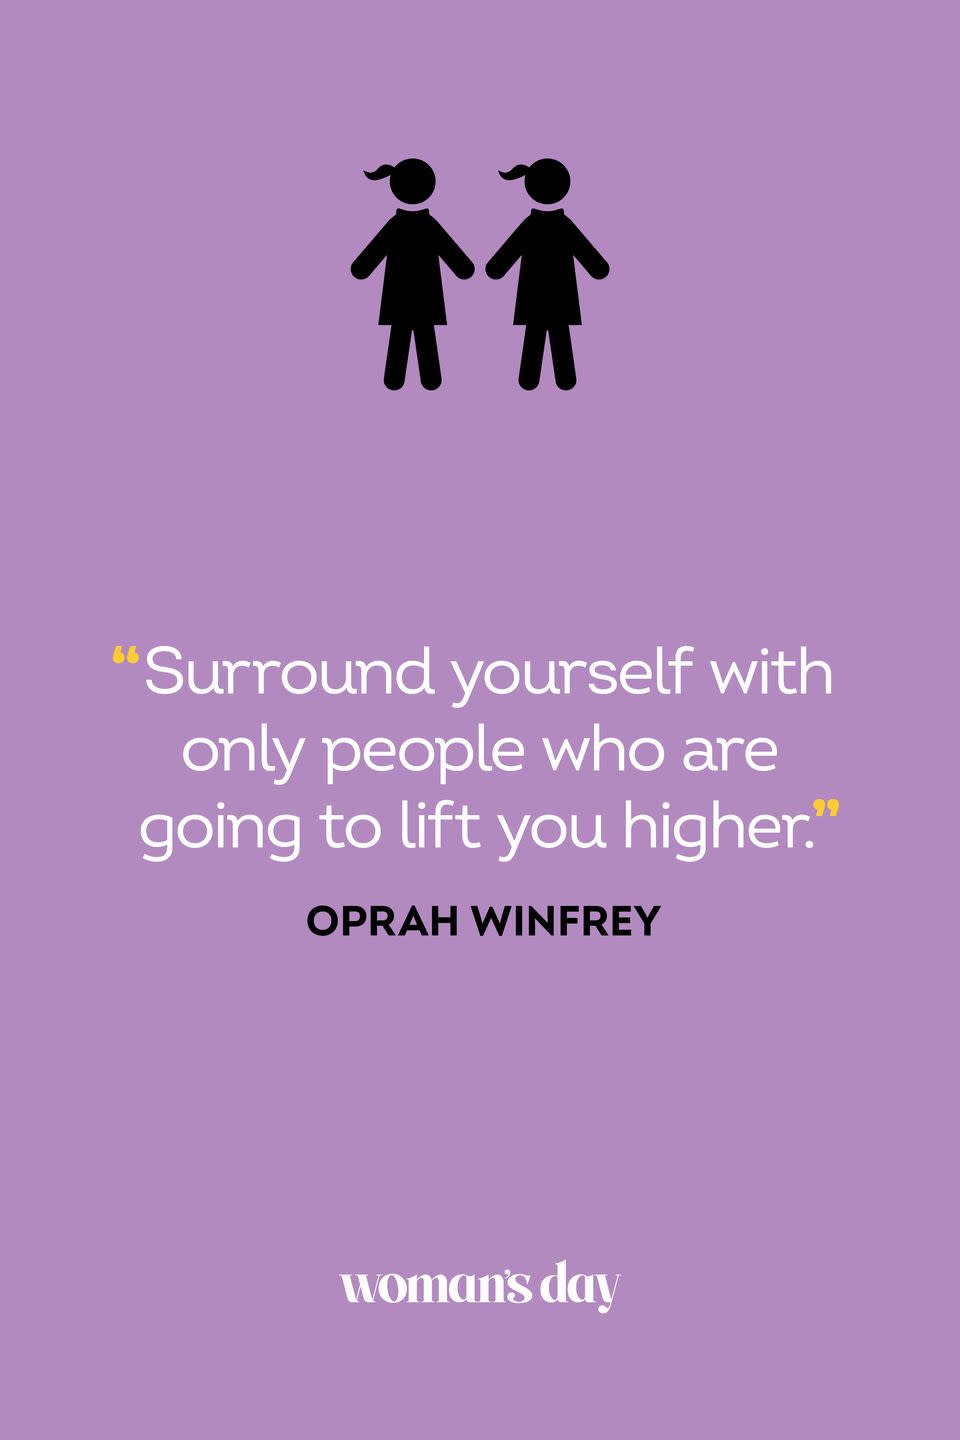 <p>“Surround yourself with only people who are going to lift you higher.”</p>